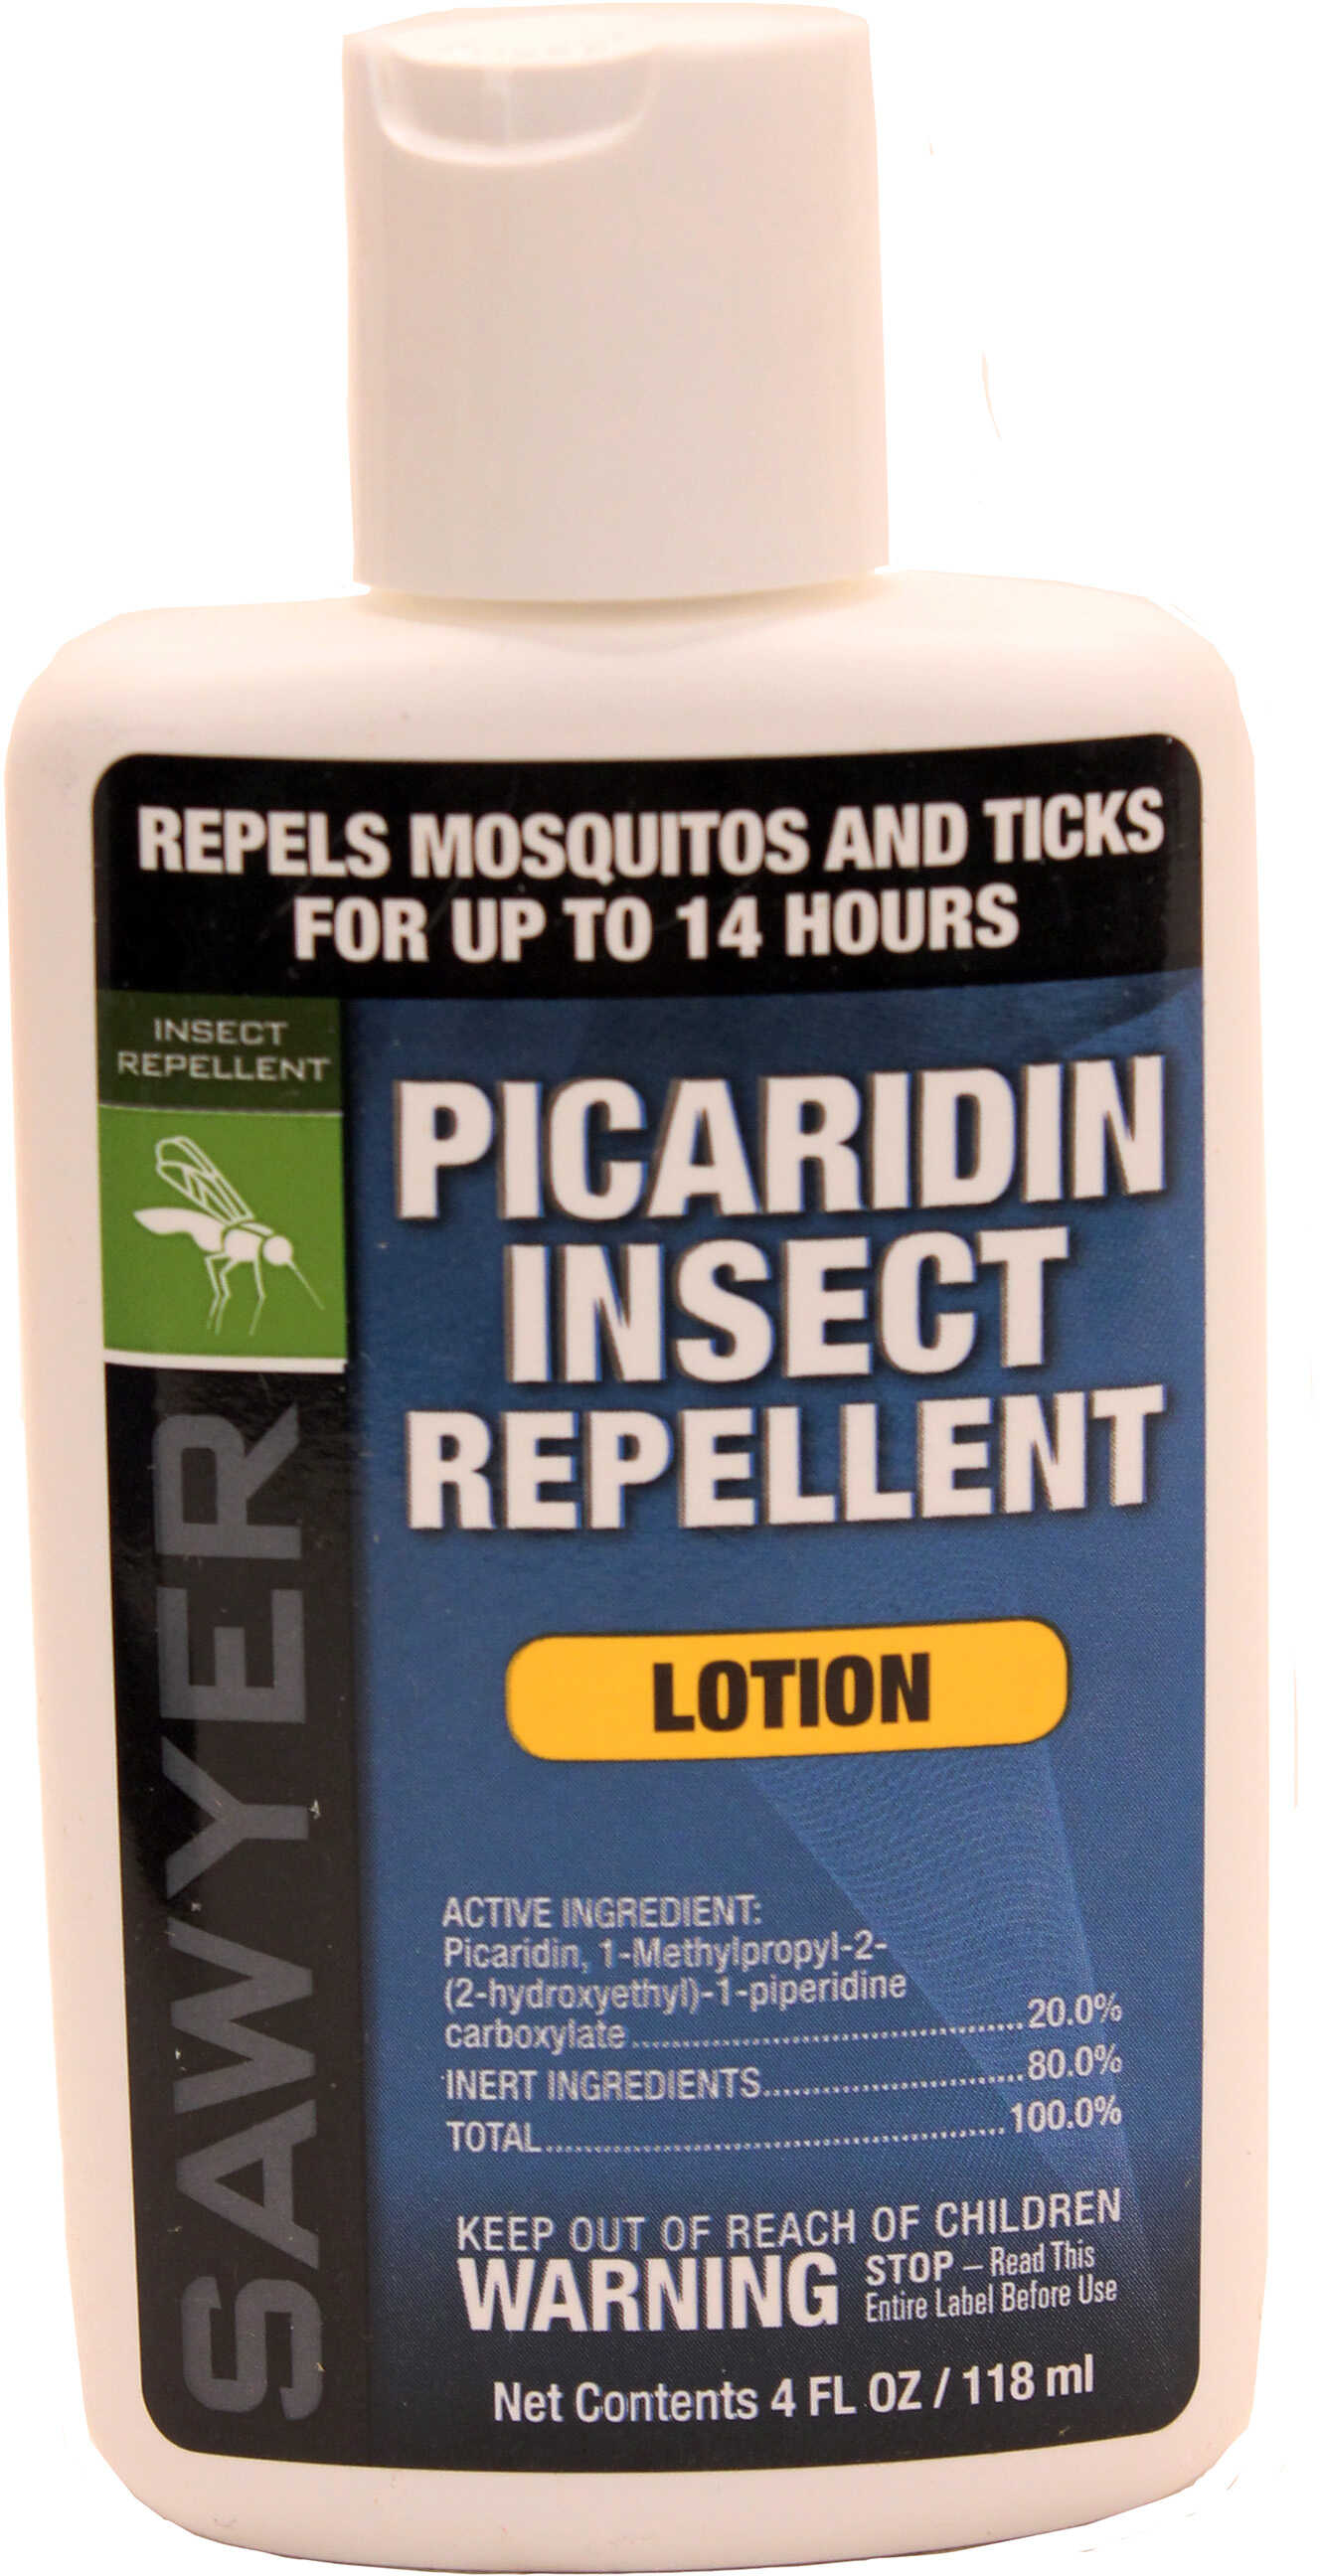 Sawyer Products INSECT Repellent PICARIDAN FISHERMANS Form 4Oz